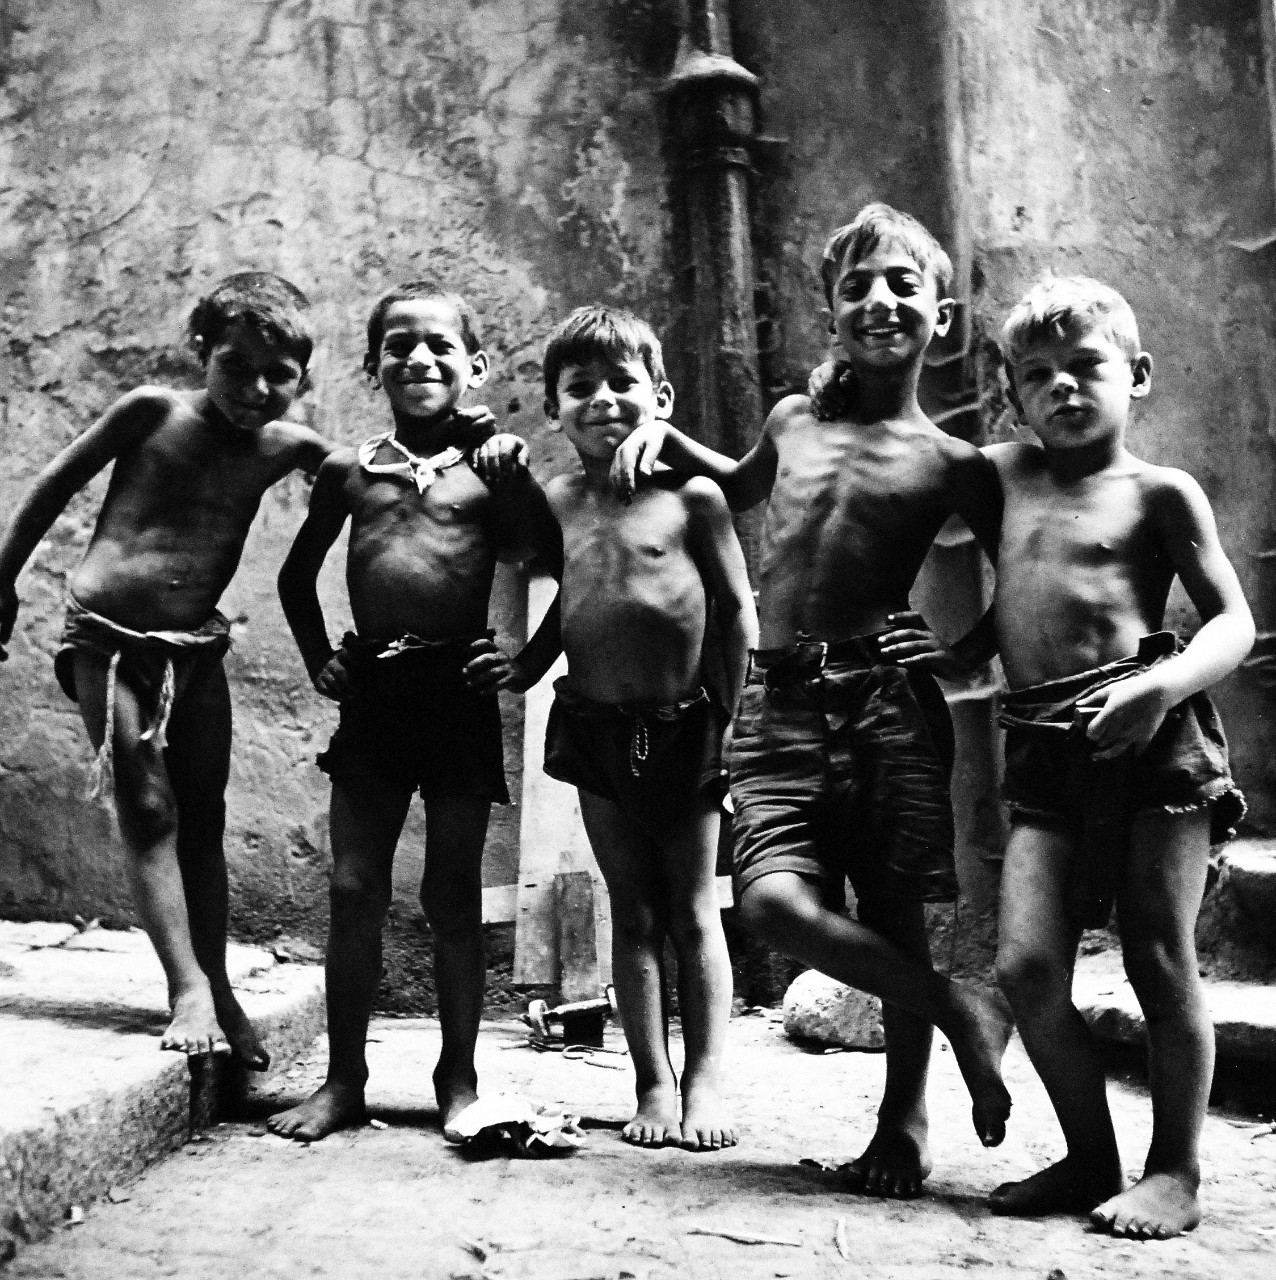 80-G-474129:  Naples, Italy, August 1944.   Children in Naples, Italy.  A group of little Italian boys pose.  Steichen Photograph Unit:  Photographed by Lieutenant Wayne Miller, August 1944.    TR-11307.   Official U.S. Navy Photograph, now in the collections of the National Archives. (2015/12/08).